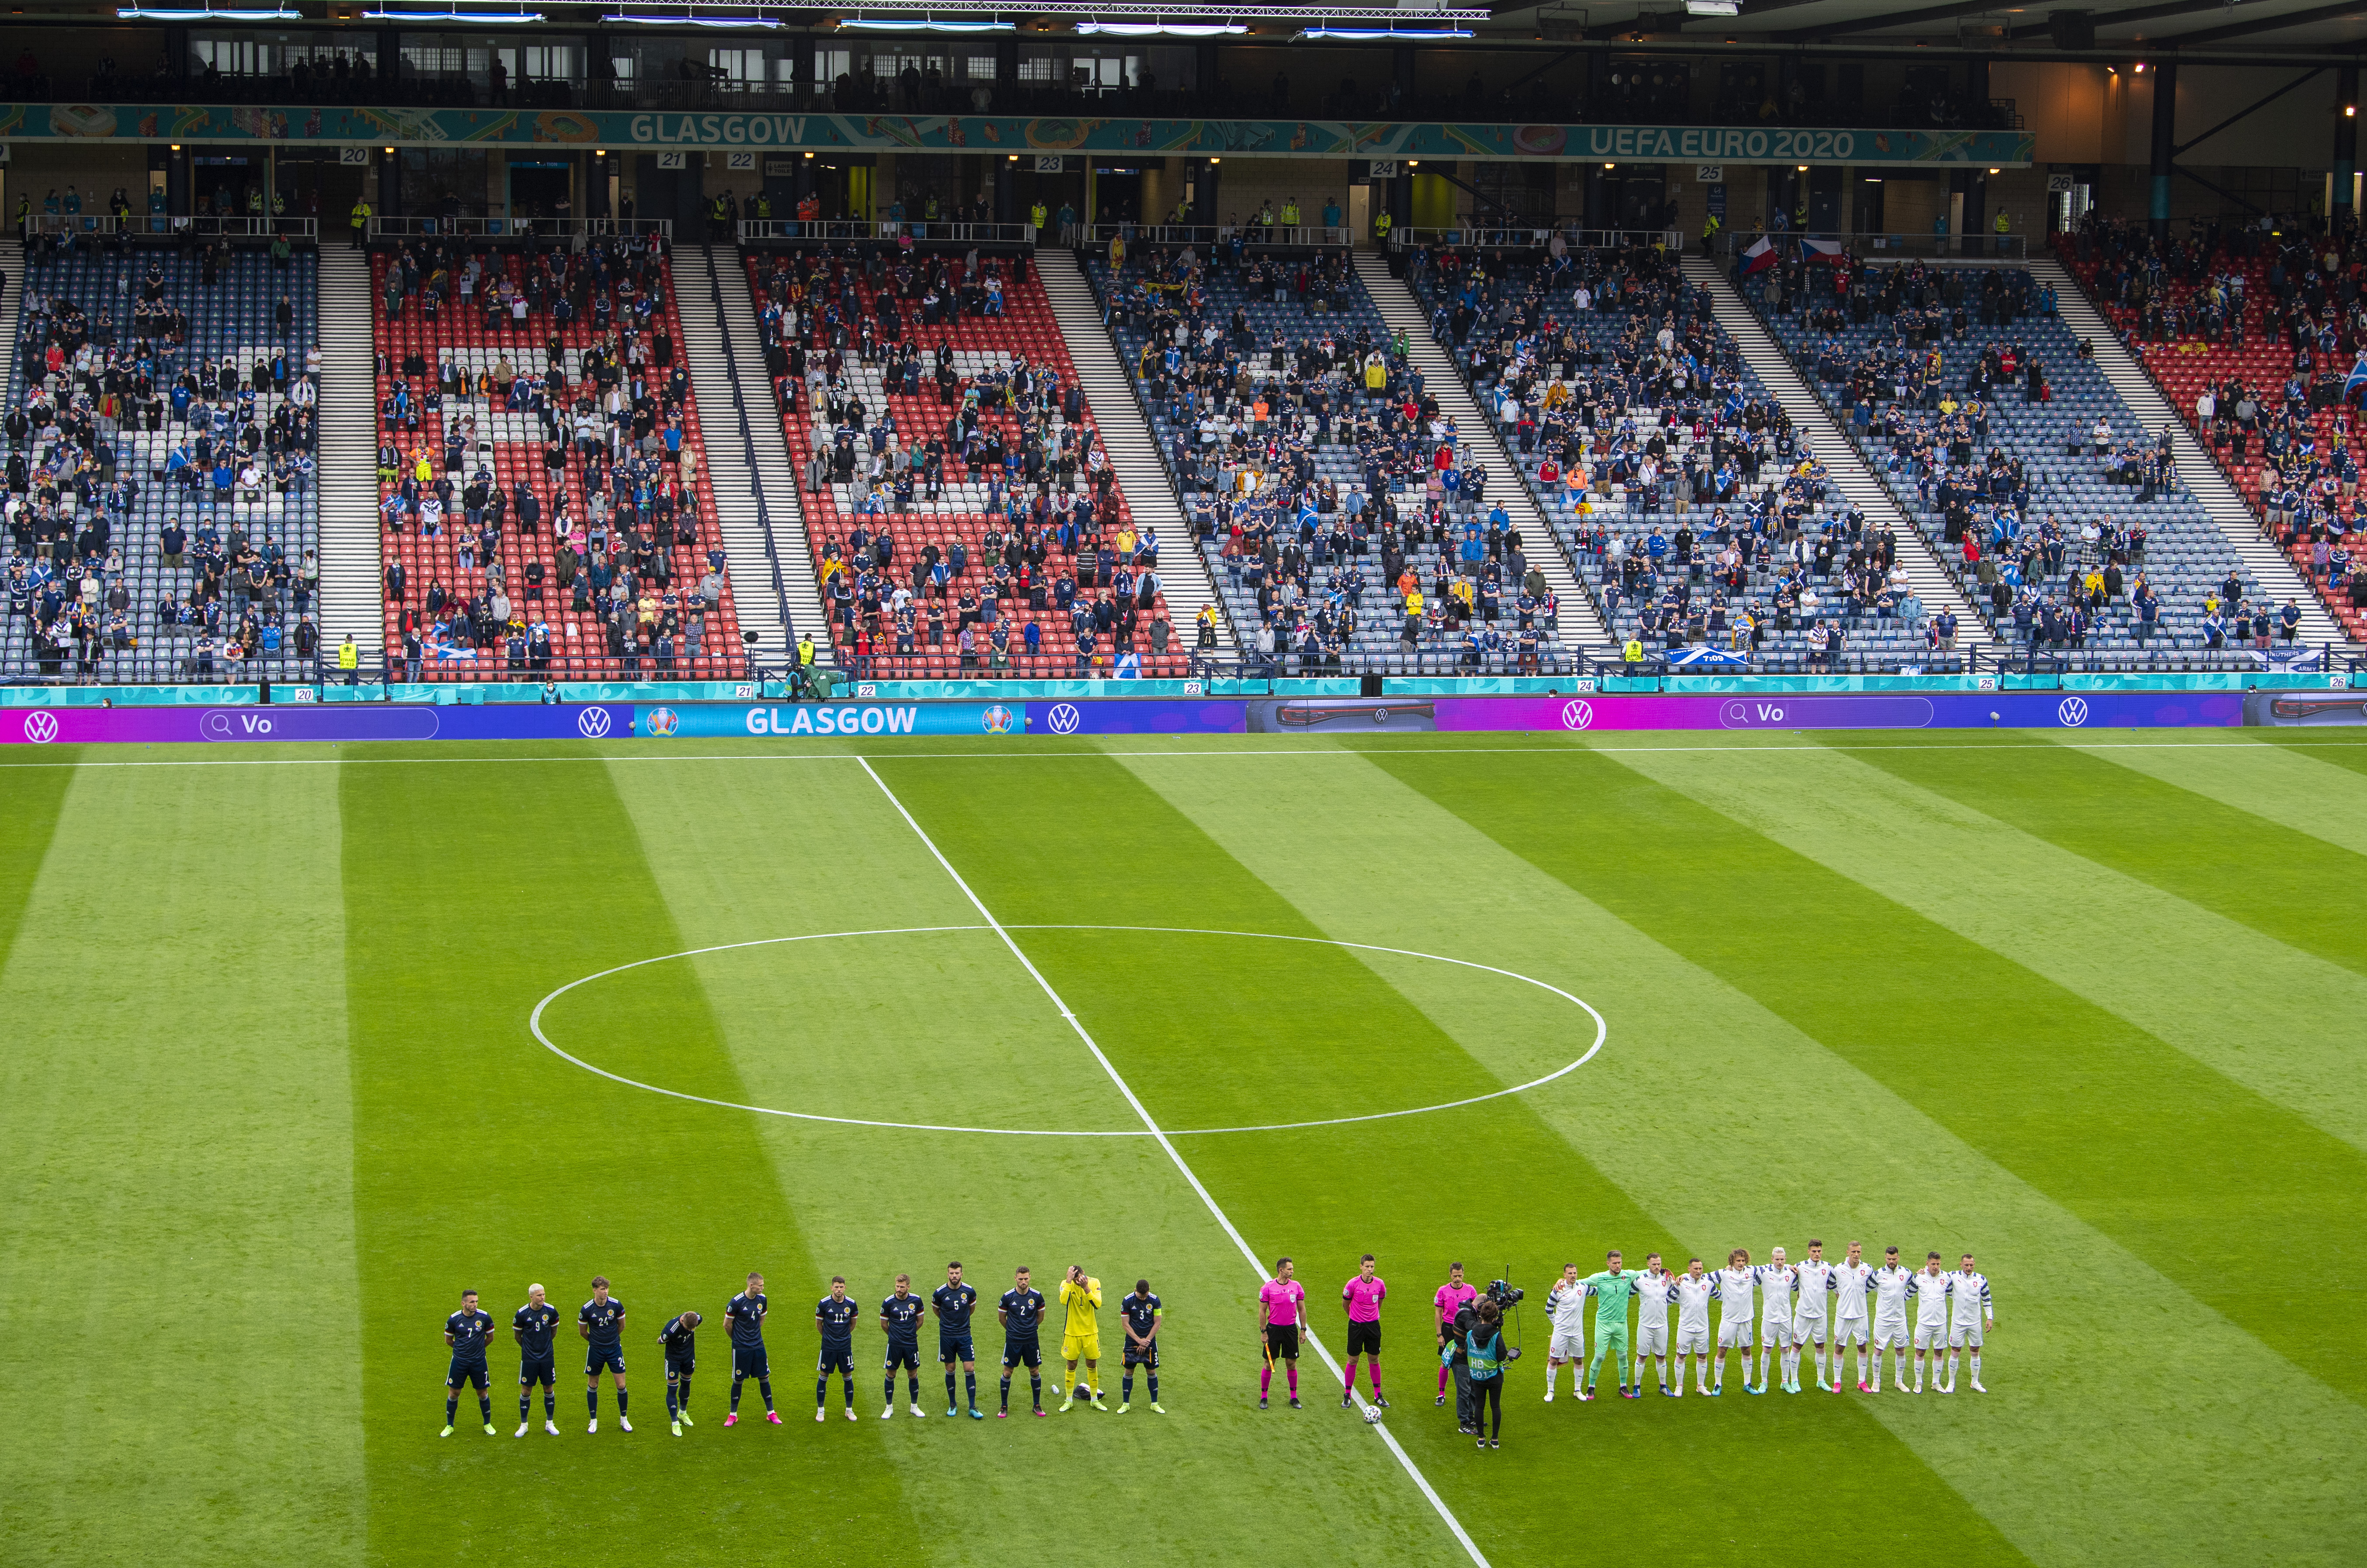 The atmosphere at Hampden was electric before kick-off.